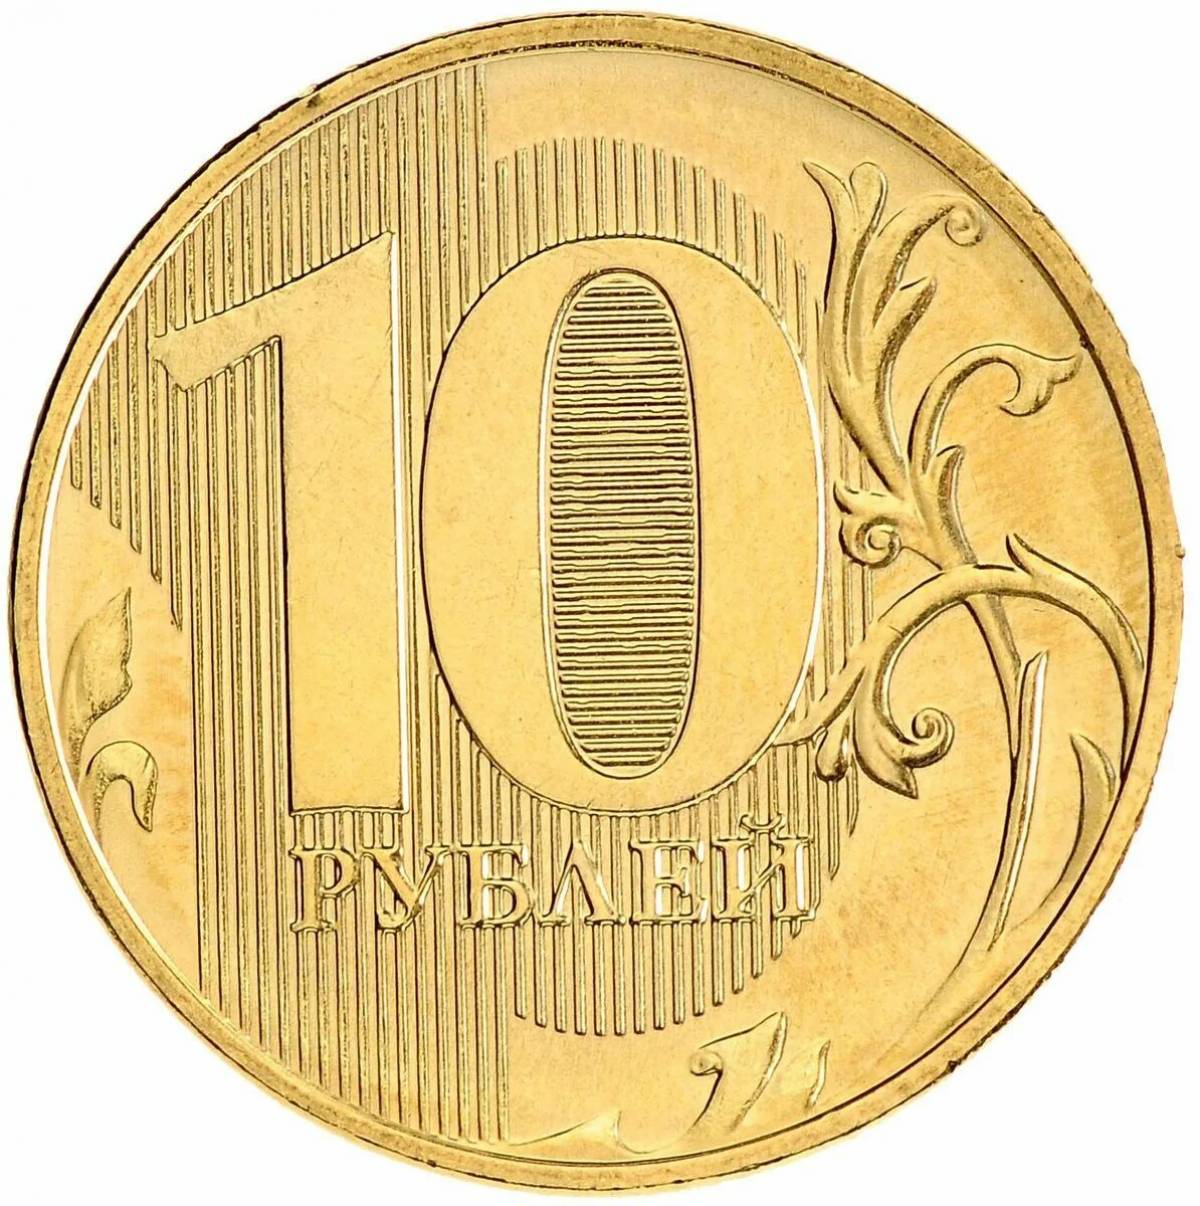 Coloring page happy coin 10 rubles